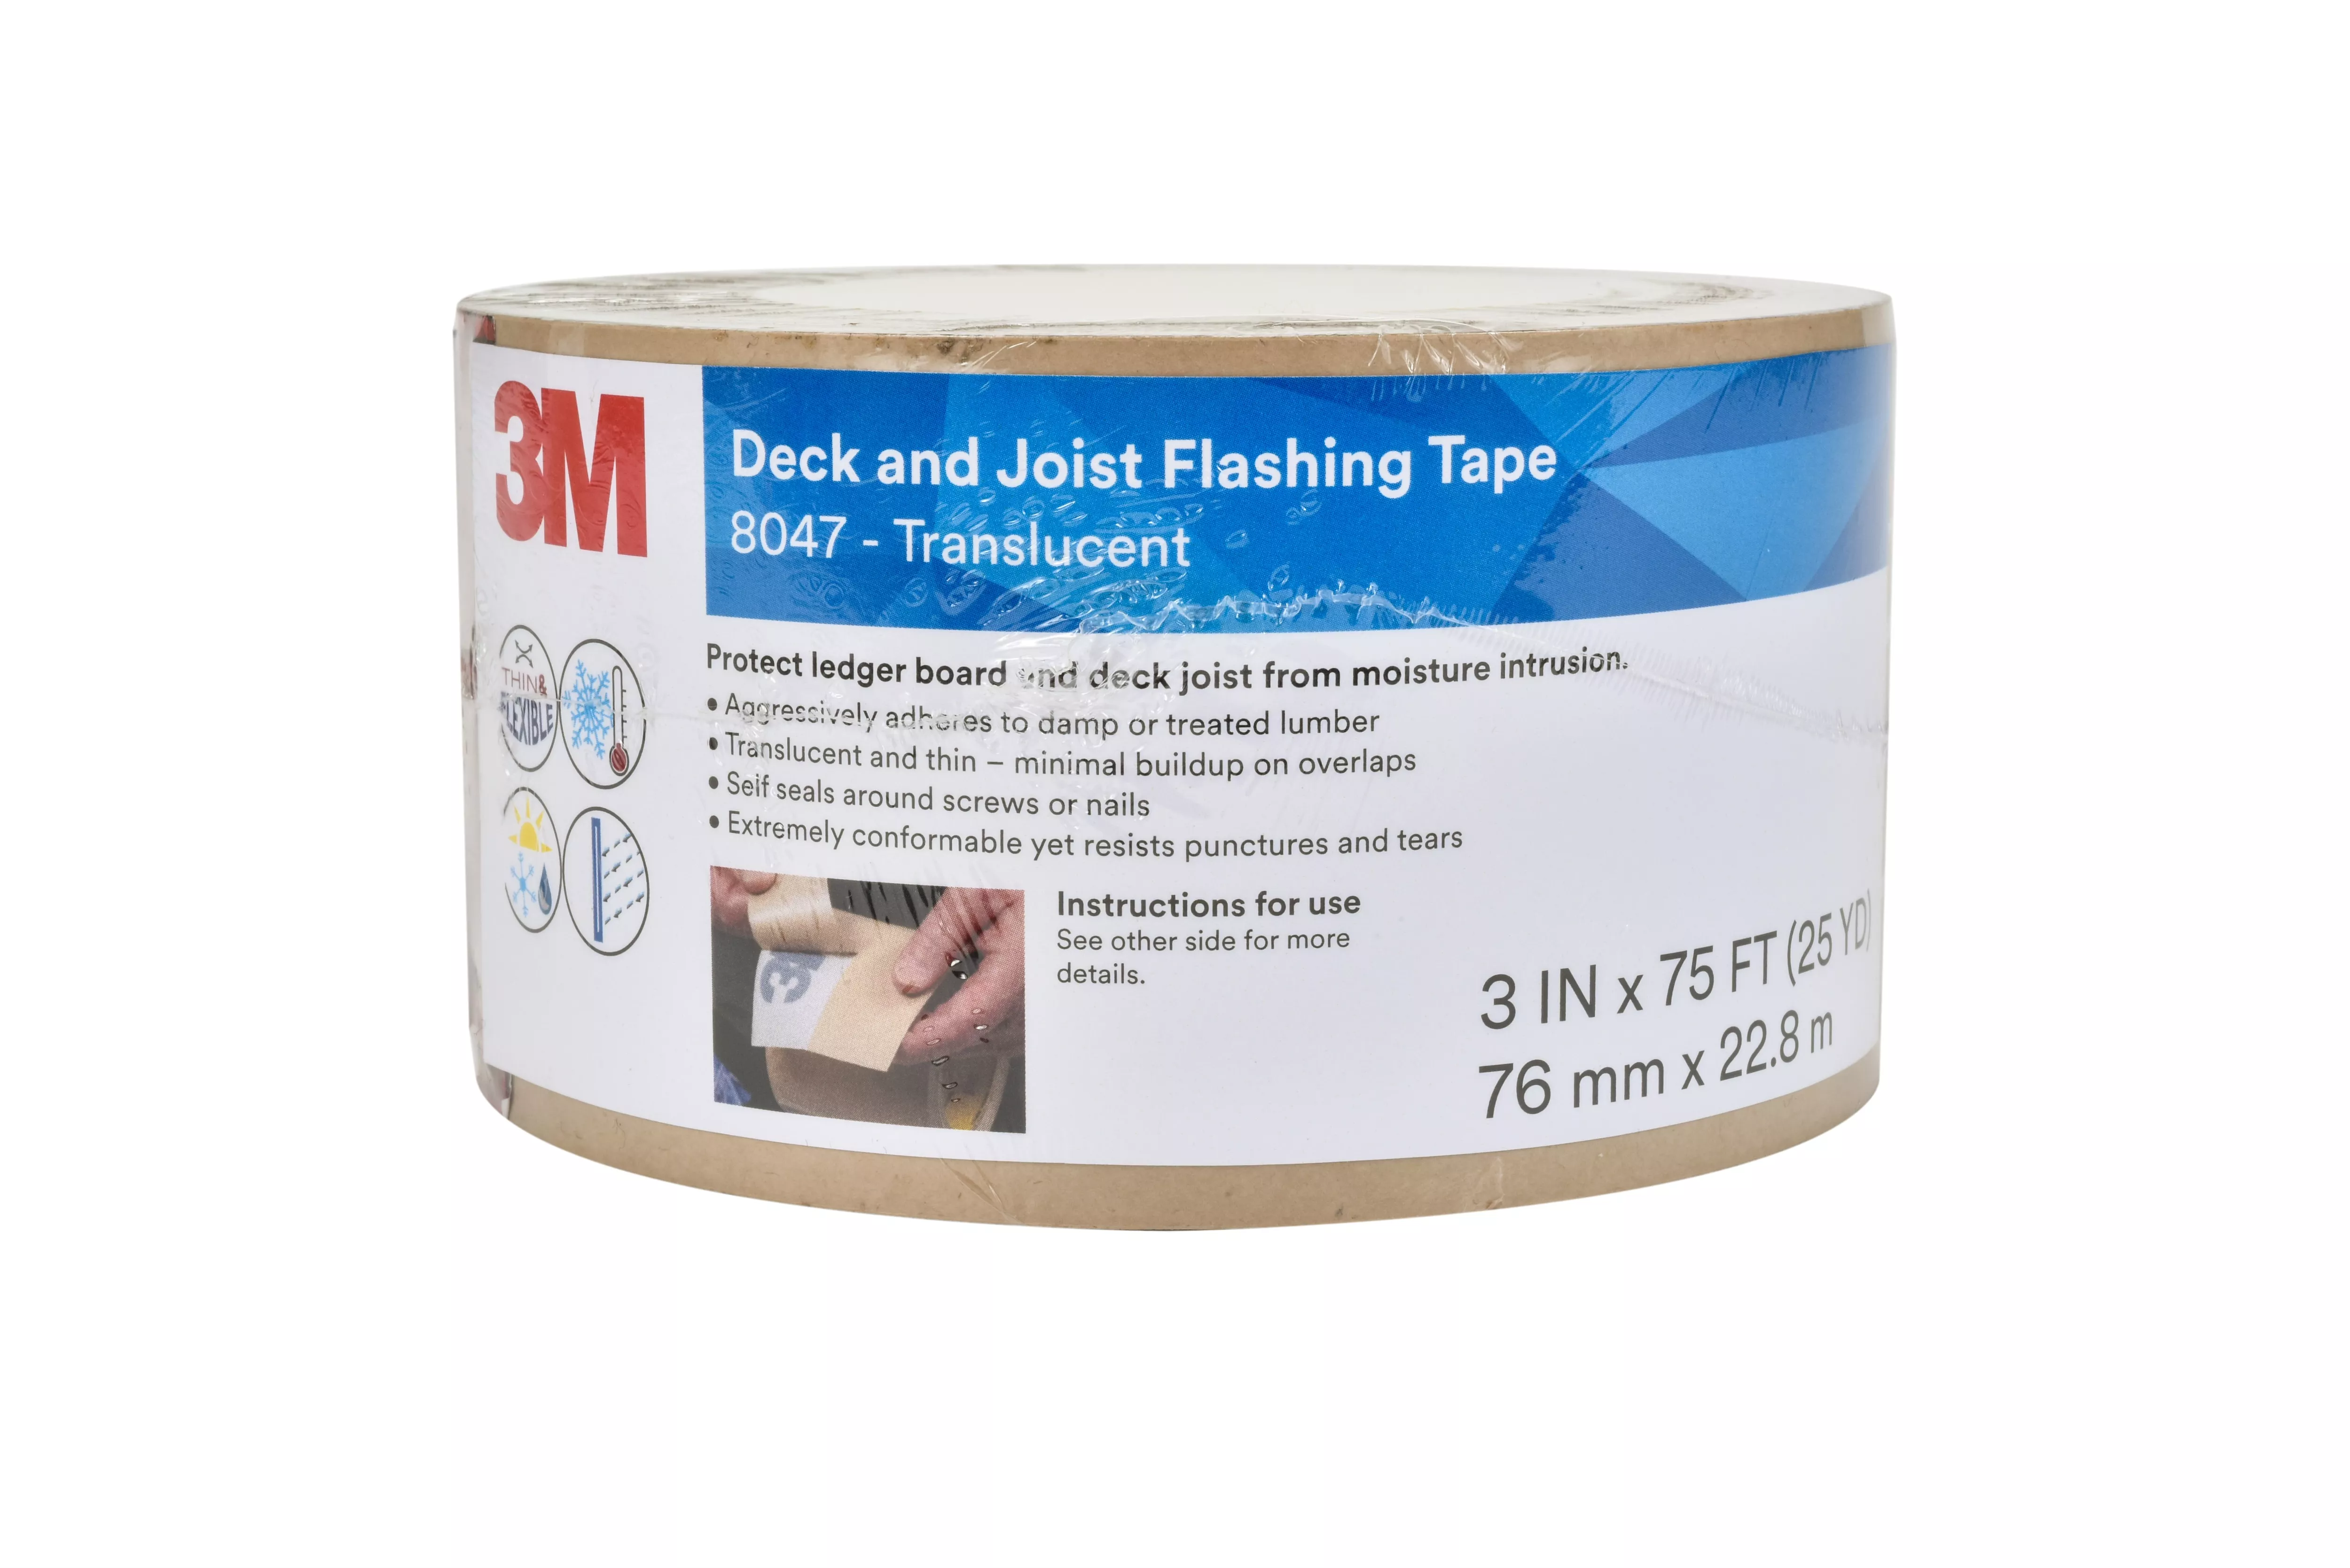 3M™ Deck and Joist Flashing Tape 8047, Translucent, 3 in x 75 ft, 12
Rolls/Case, Solid Liner